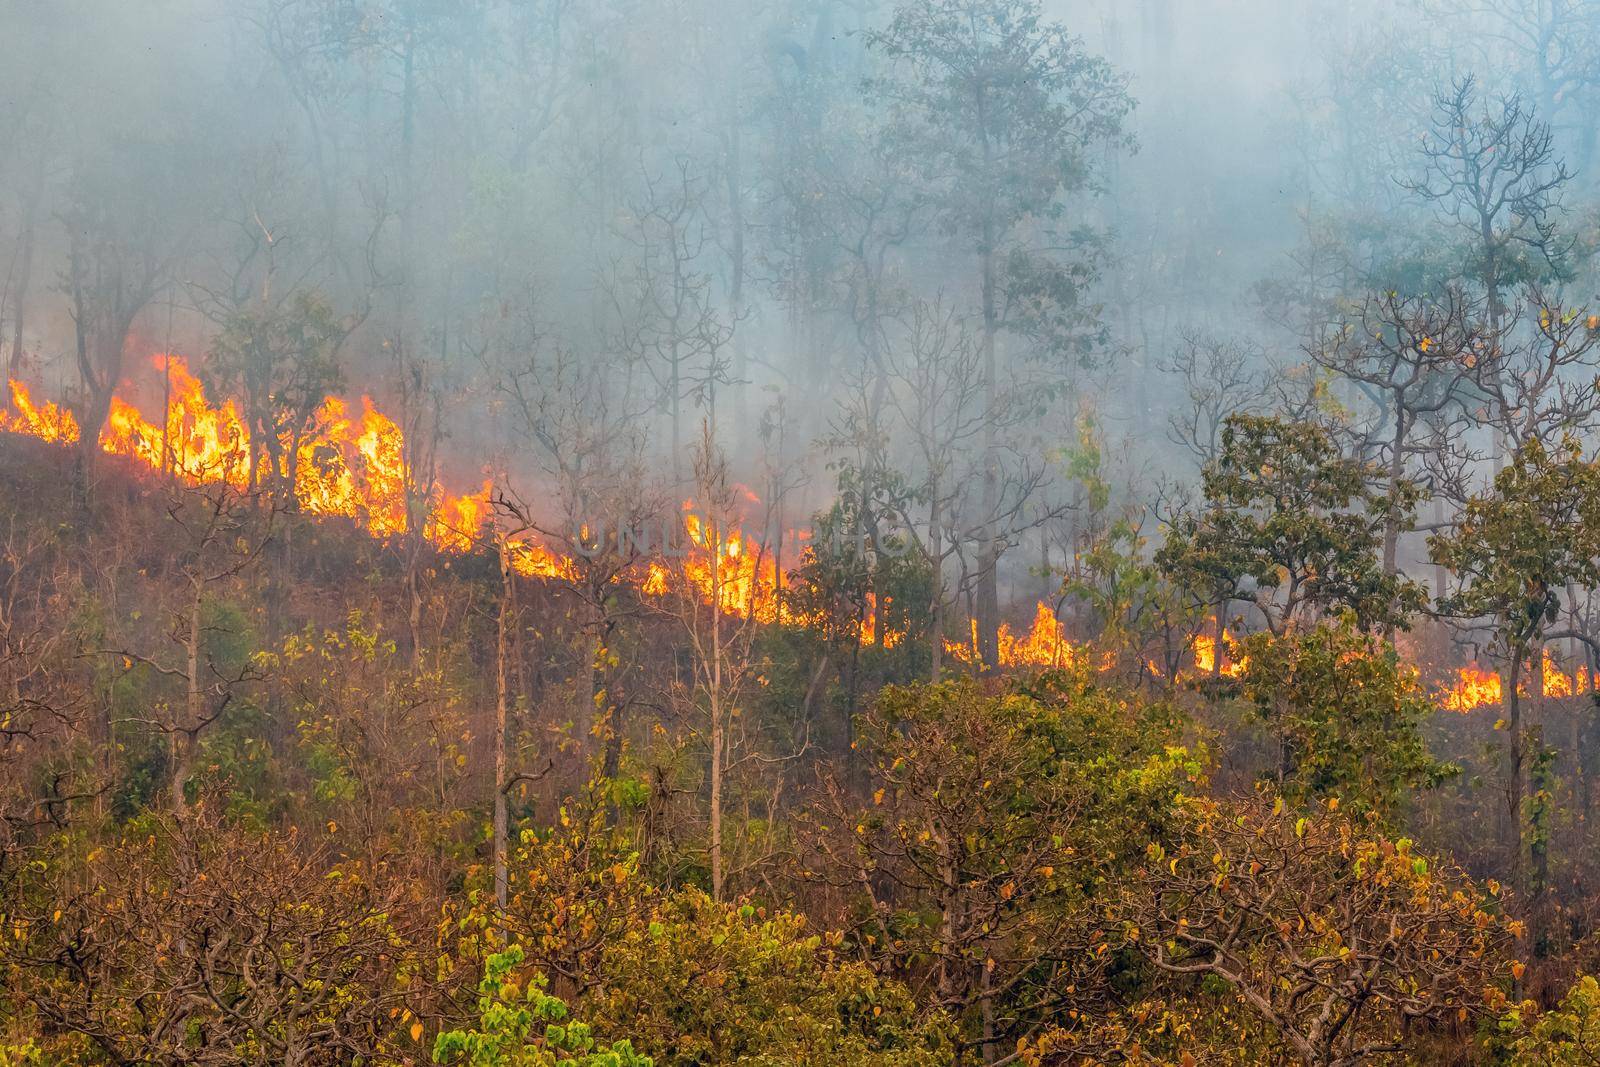 Forest fire is burning primarily as a surface fire, spreading along the ground by toa55